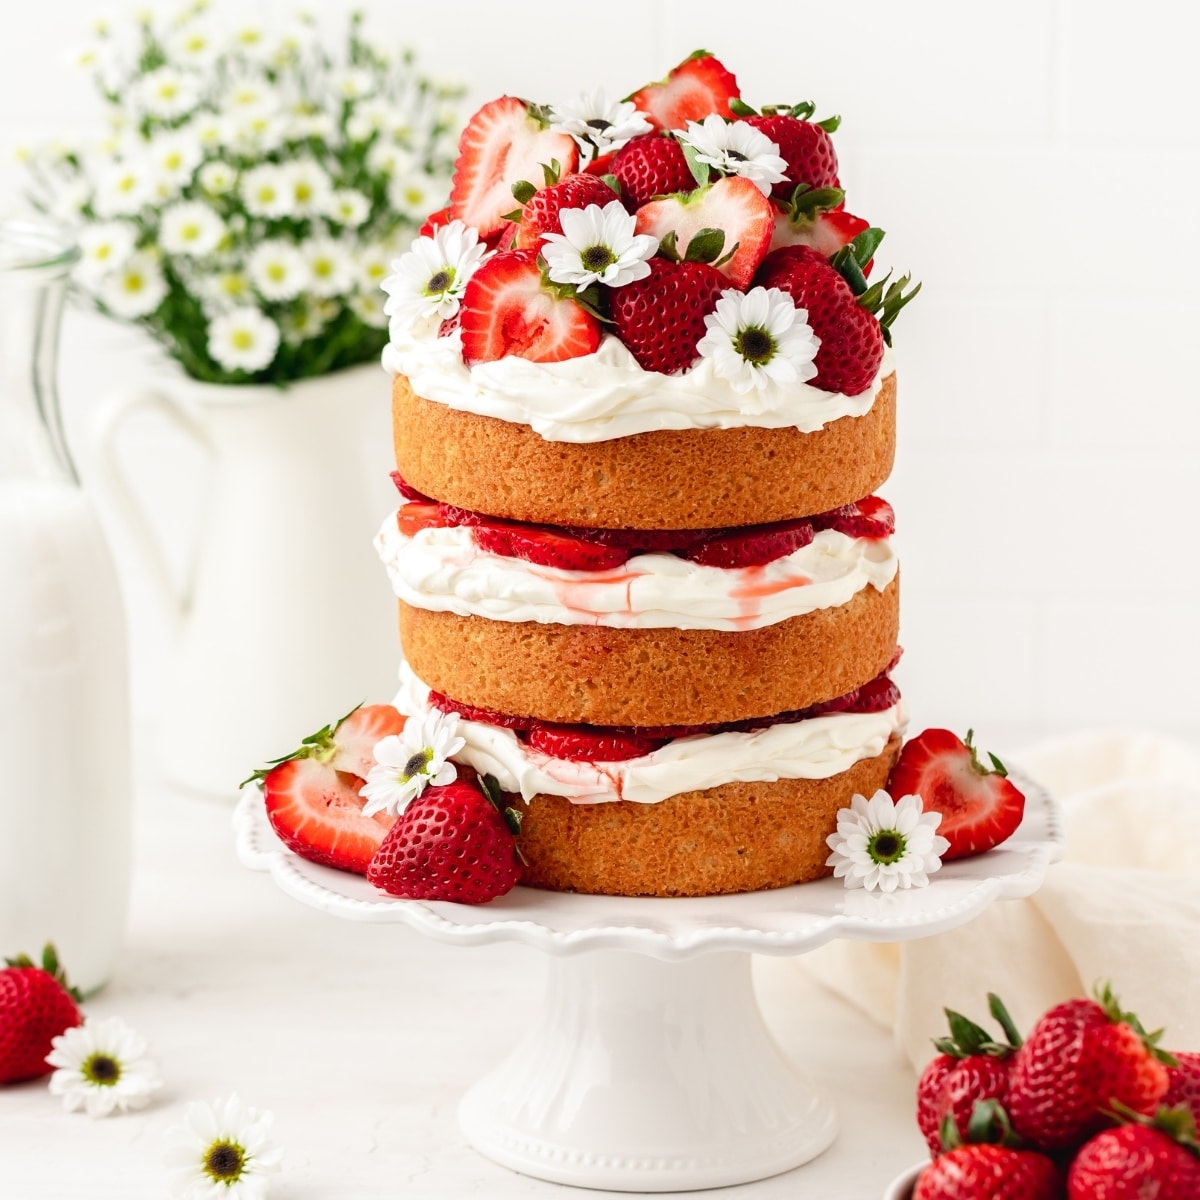 Hearty Strawberry Shortcake | Online Cake Delivery KL/PJ Malaysia